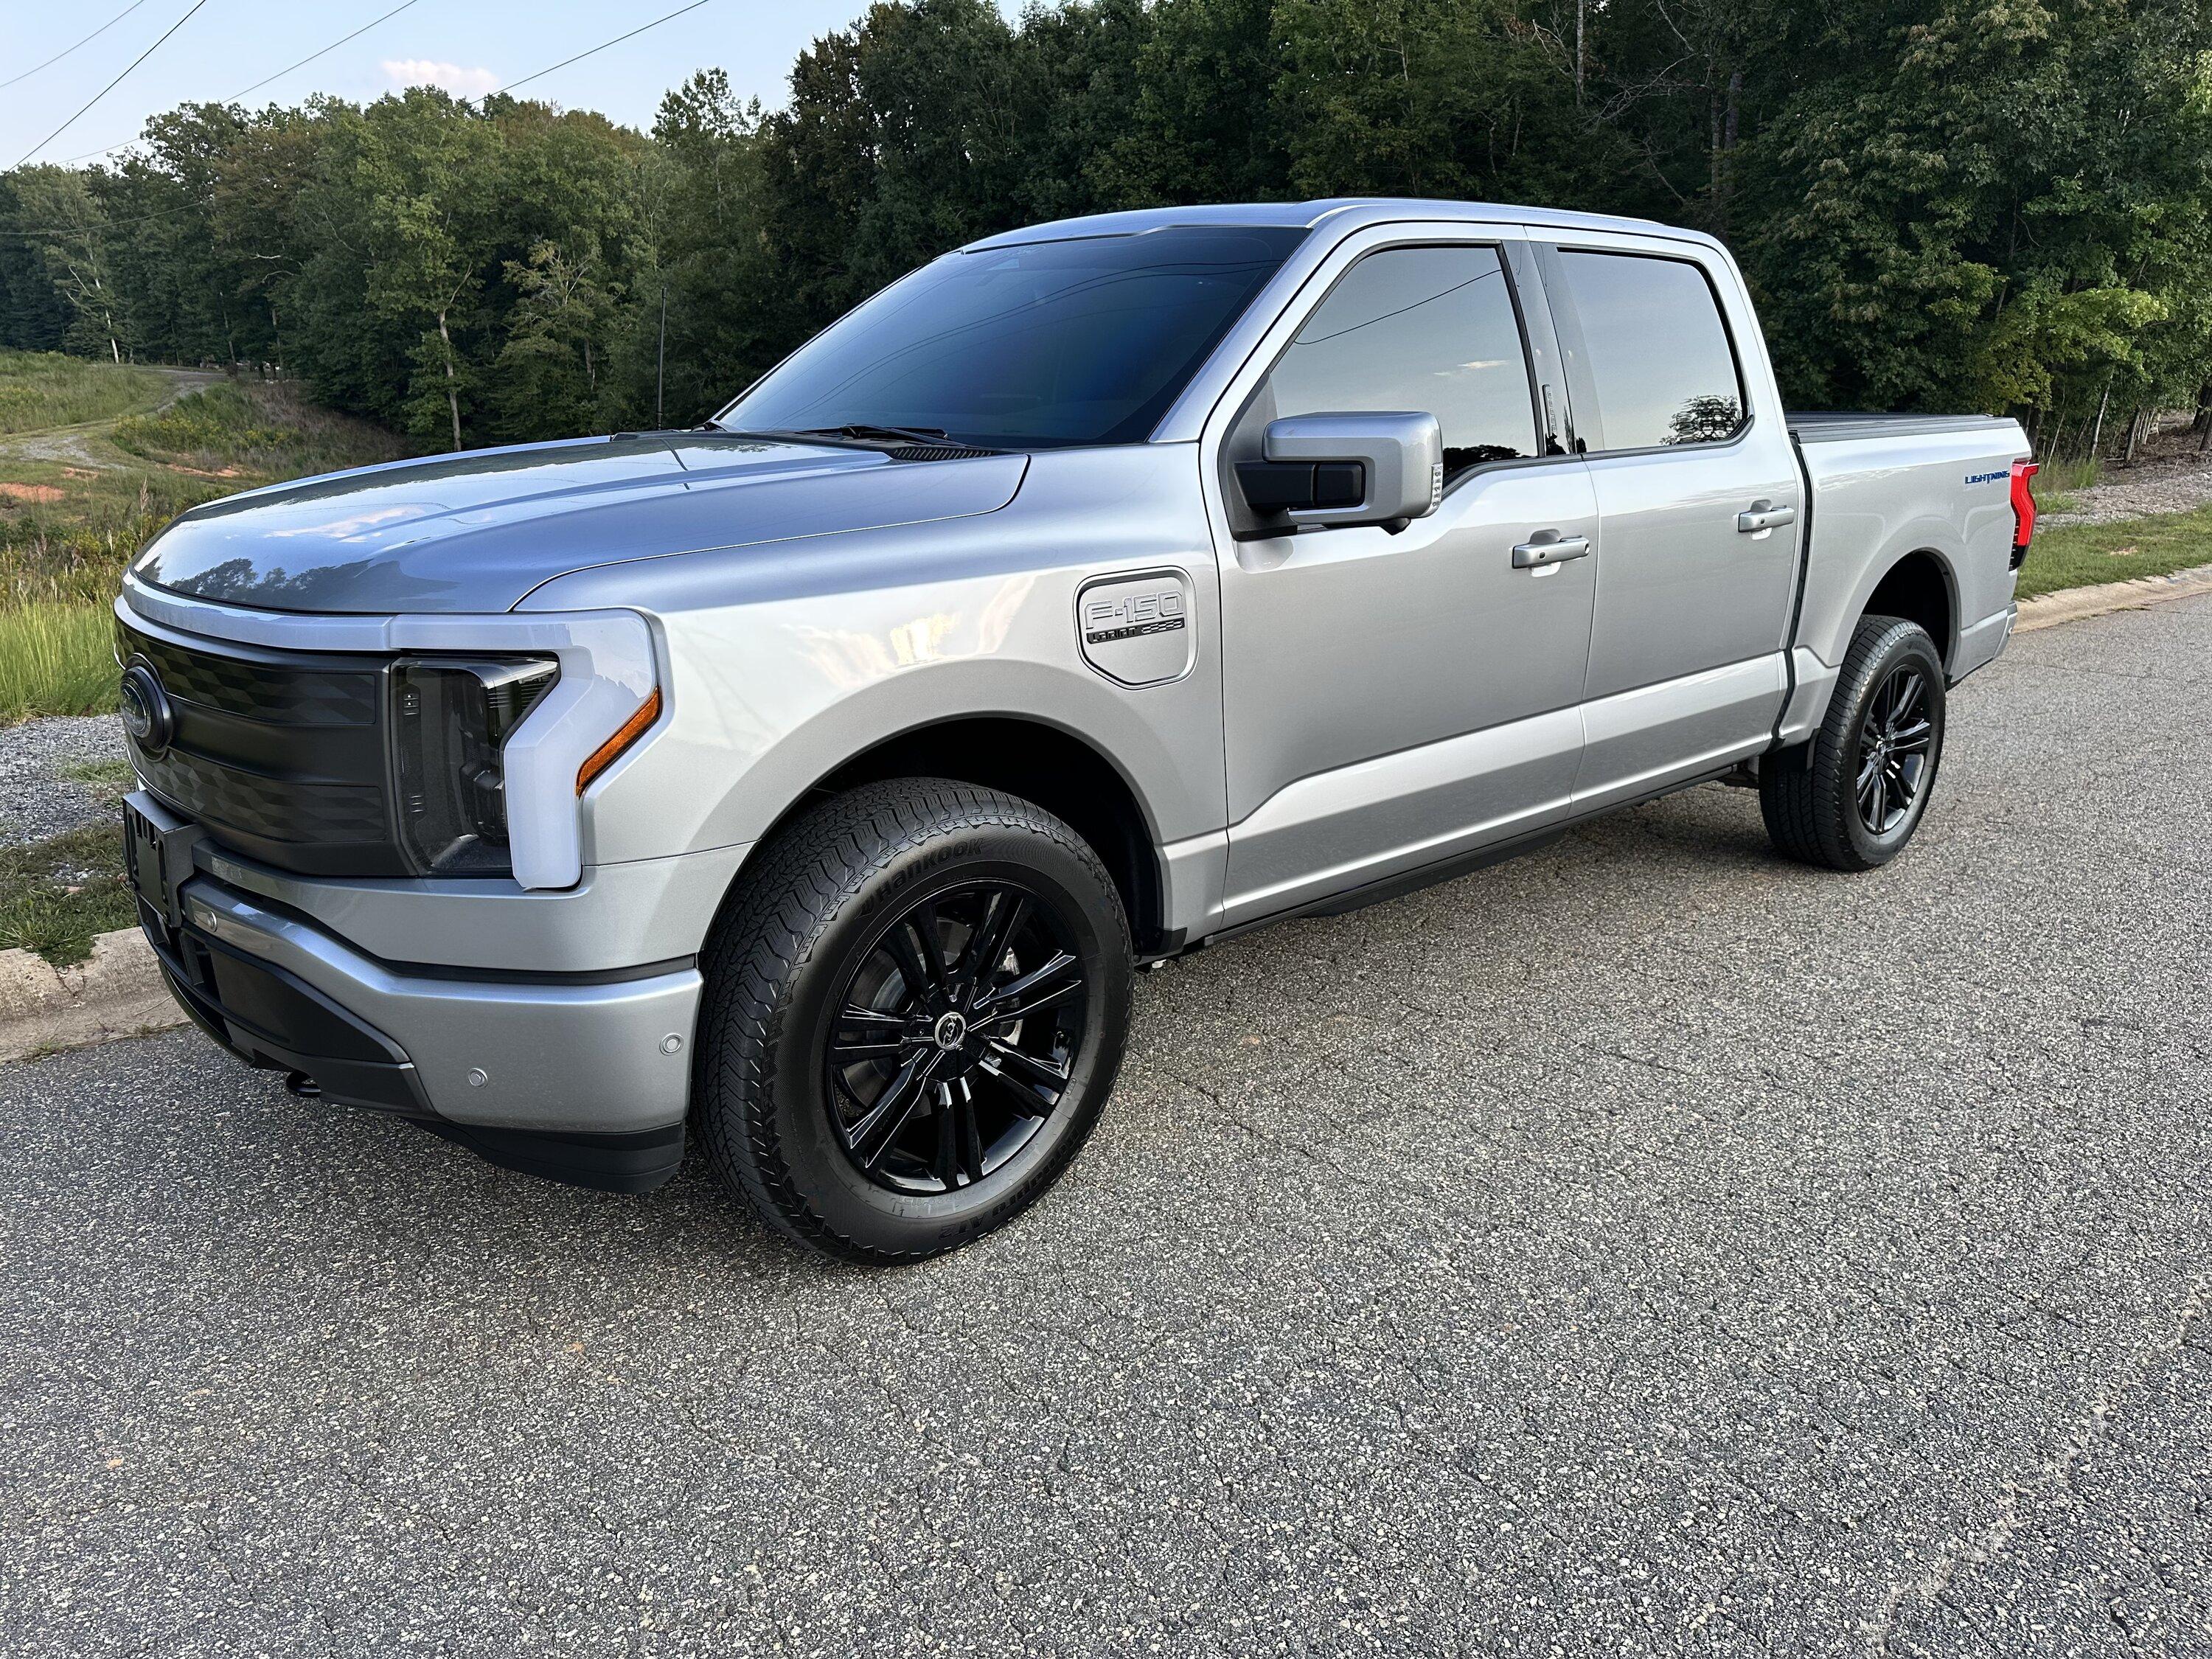 Ford F-150 Lightning Gloss black 20" wheels on my Lightning Lariat with stock AT tires, tints, AMP Power Steps CA4BC0FE-A7E5-4807-A02A-27A132E77C9C